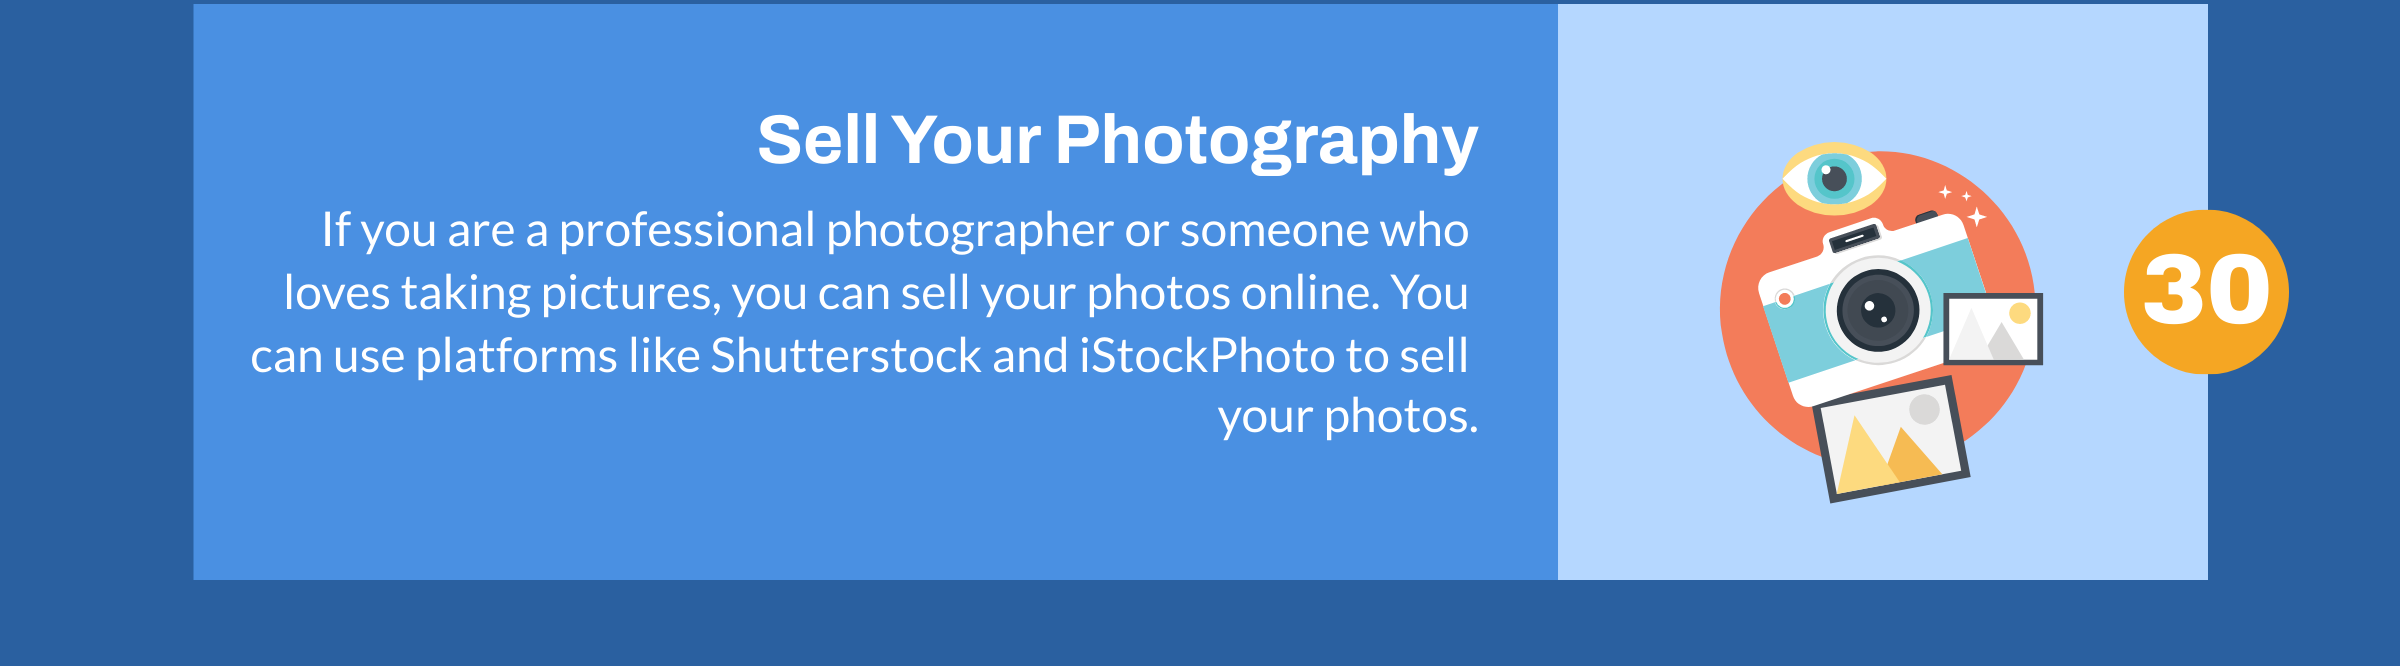 Sell Your Photography